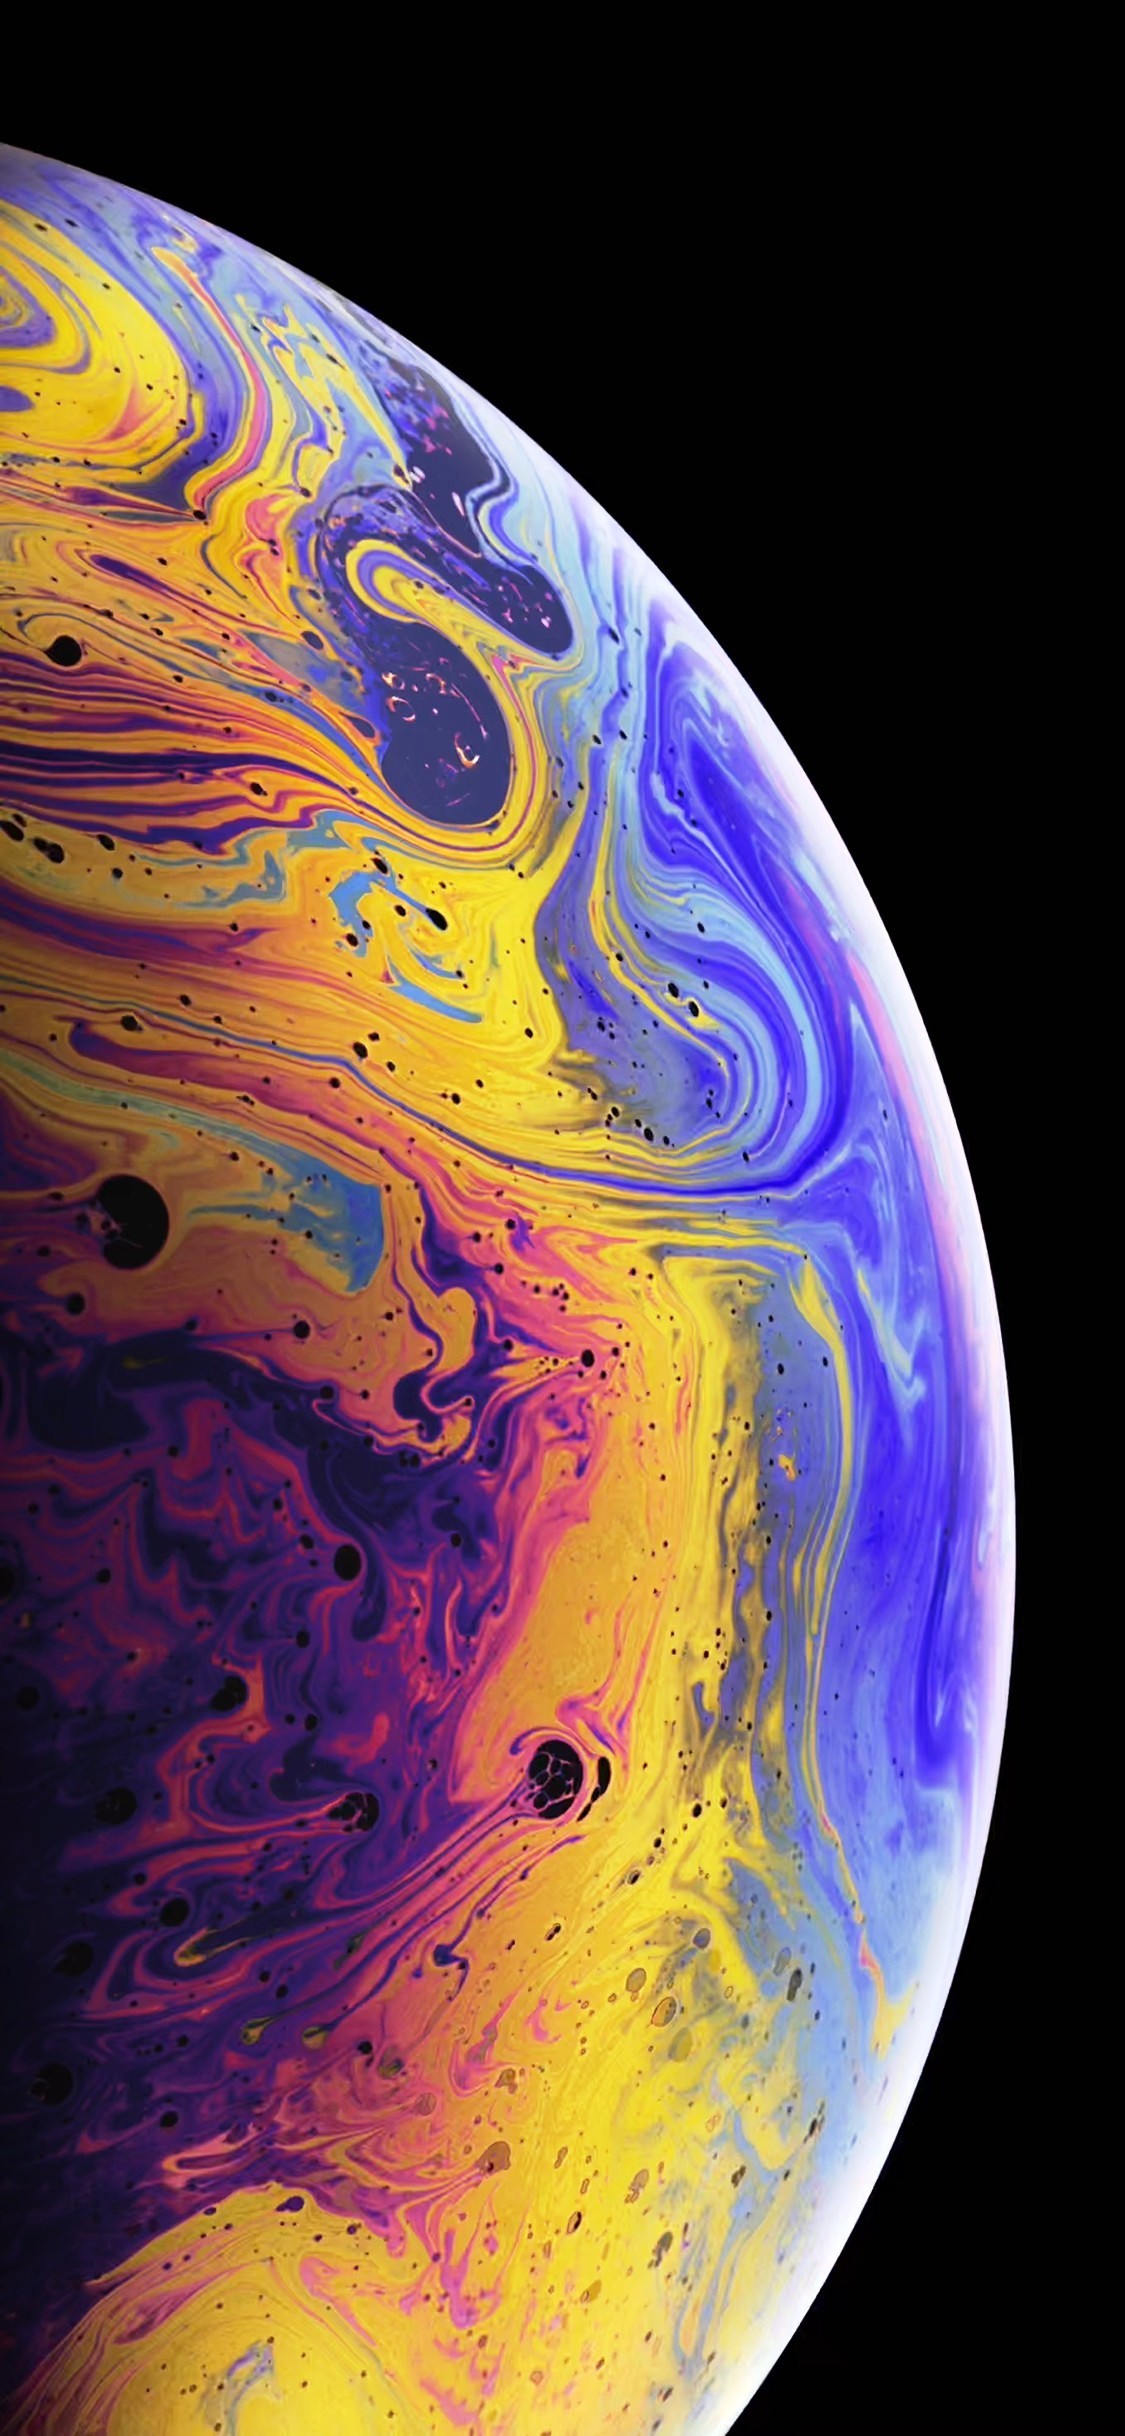 iPhone XS Wallpaper in HD With high-resolution 1125X2436 pixel. You can use this wallpaper for your iPhone 5, 6, 7, 8, X, XS, XR backgrounds, Mobile Screensaver, or iPad Lock Screen